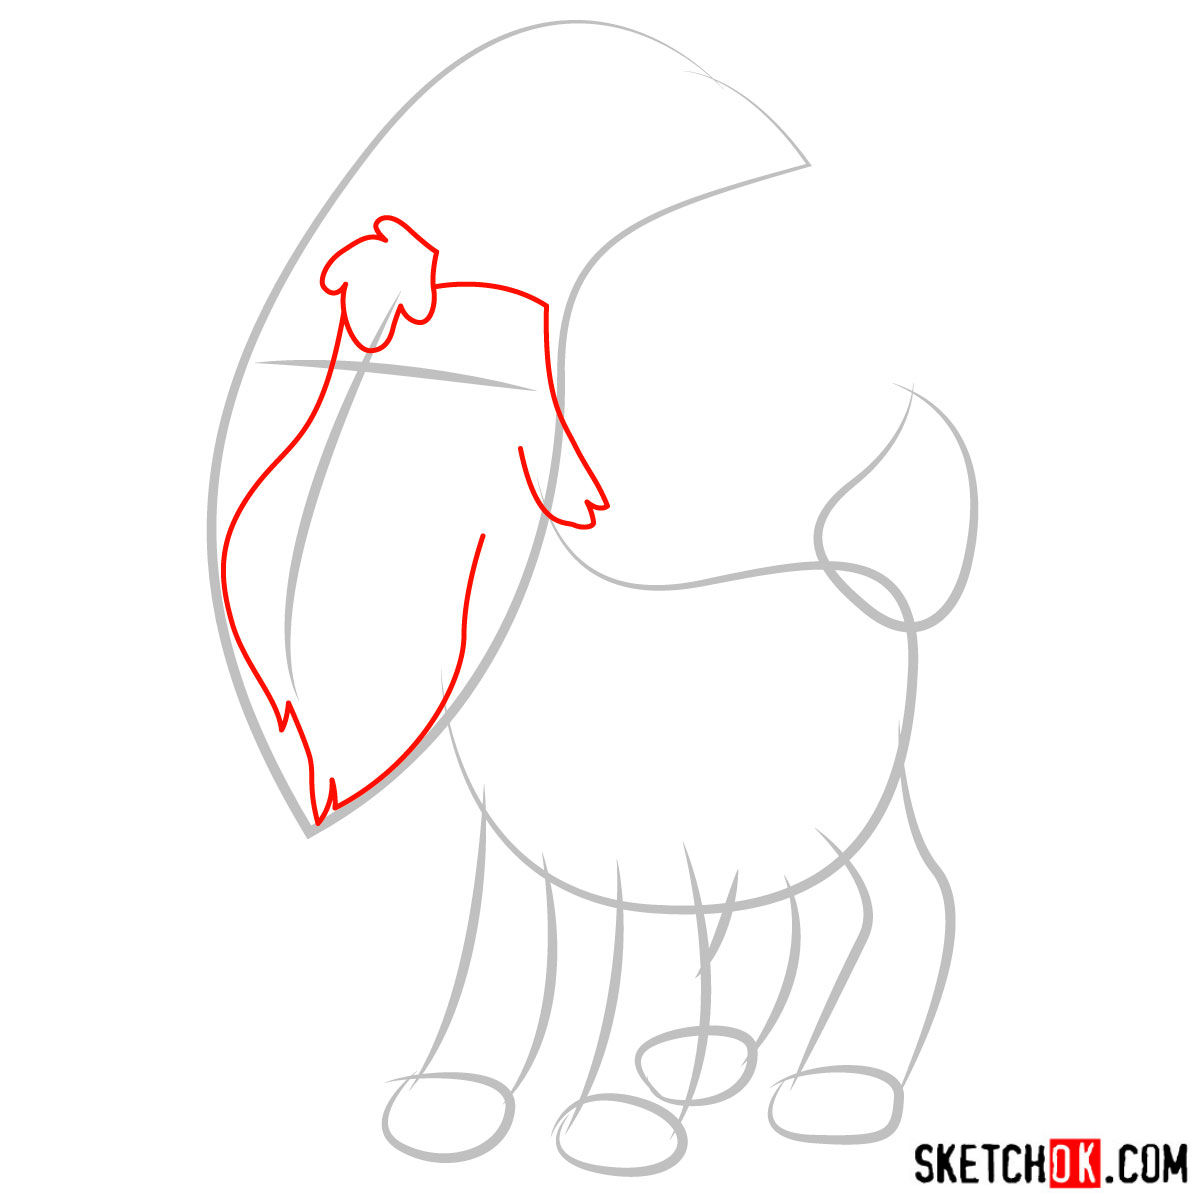 How to draw Gompers the goat - Sketchok easy drawing guides